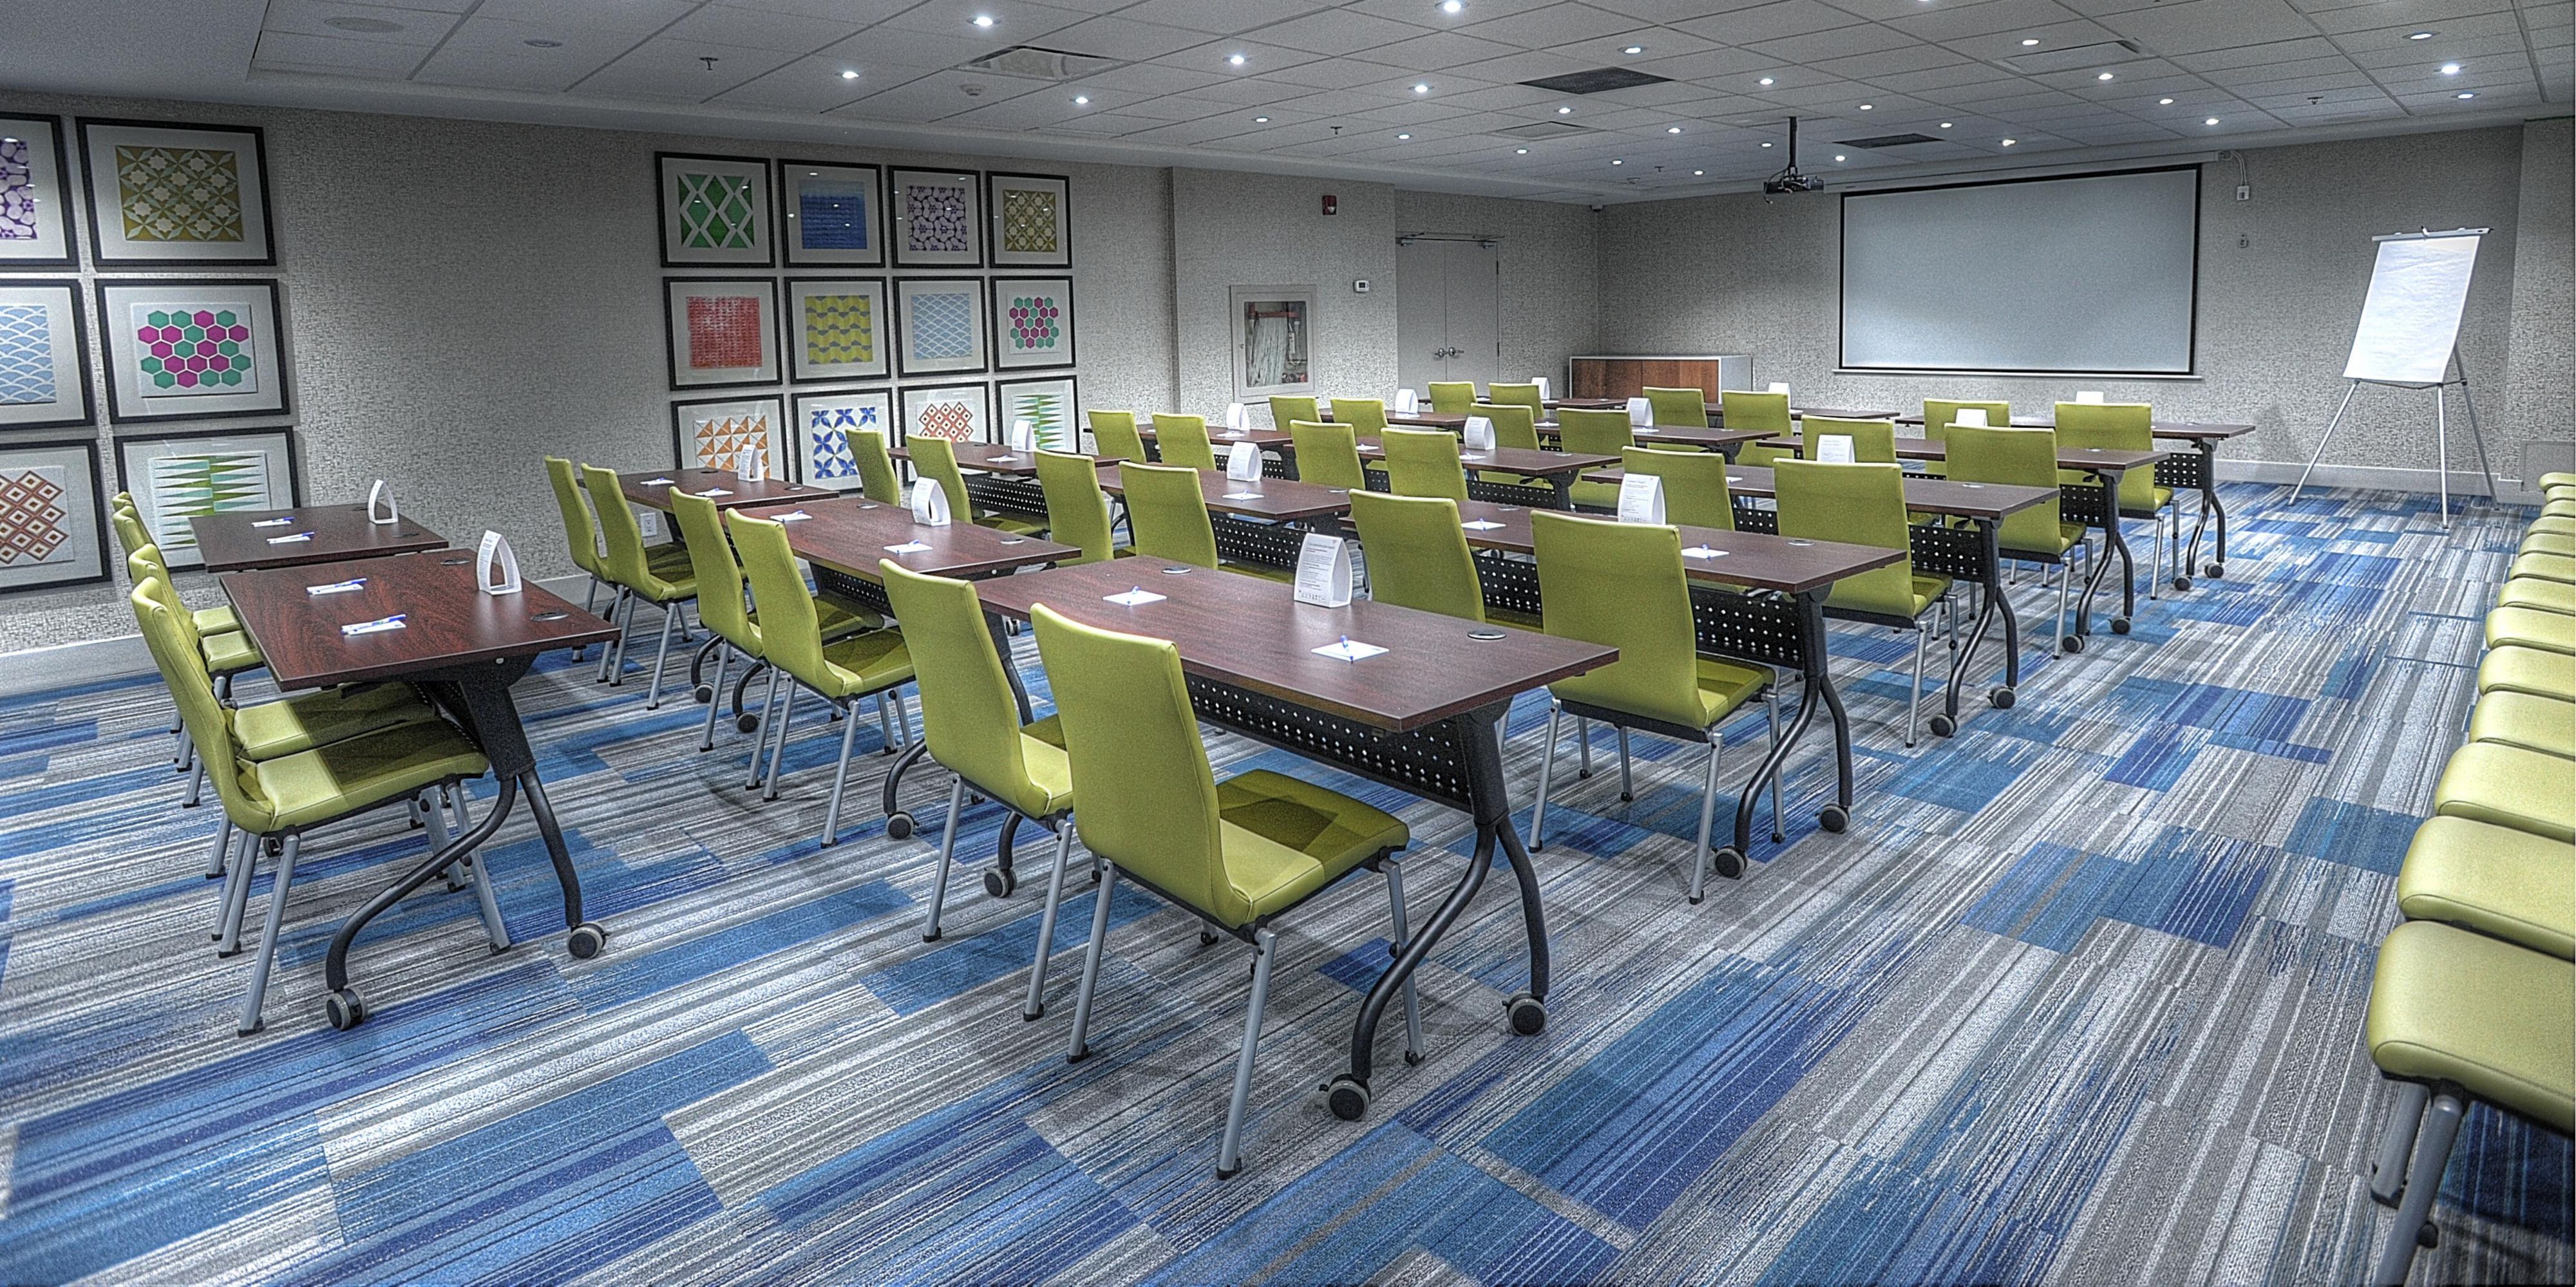 We have over 1,150 square feet of meeting space, ready to host your next event or meeting. We can fit up to 40 people in our meeting space, call us today for rates and availability.